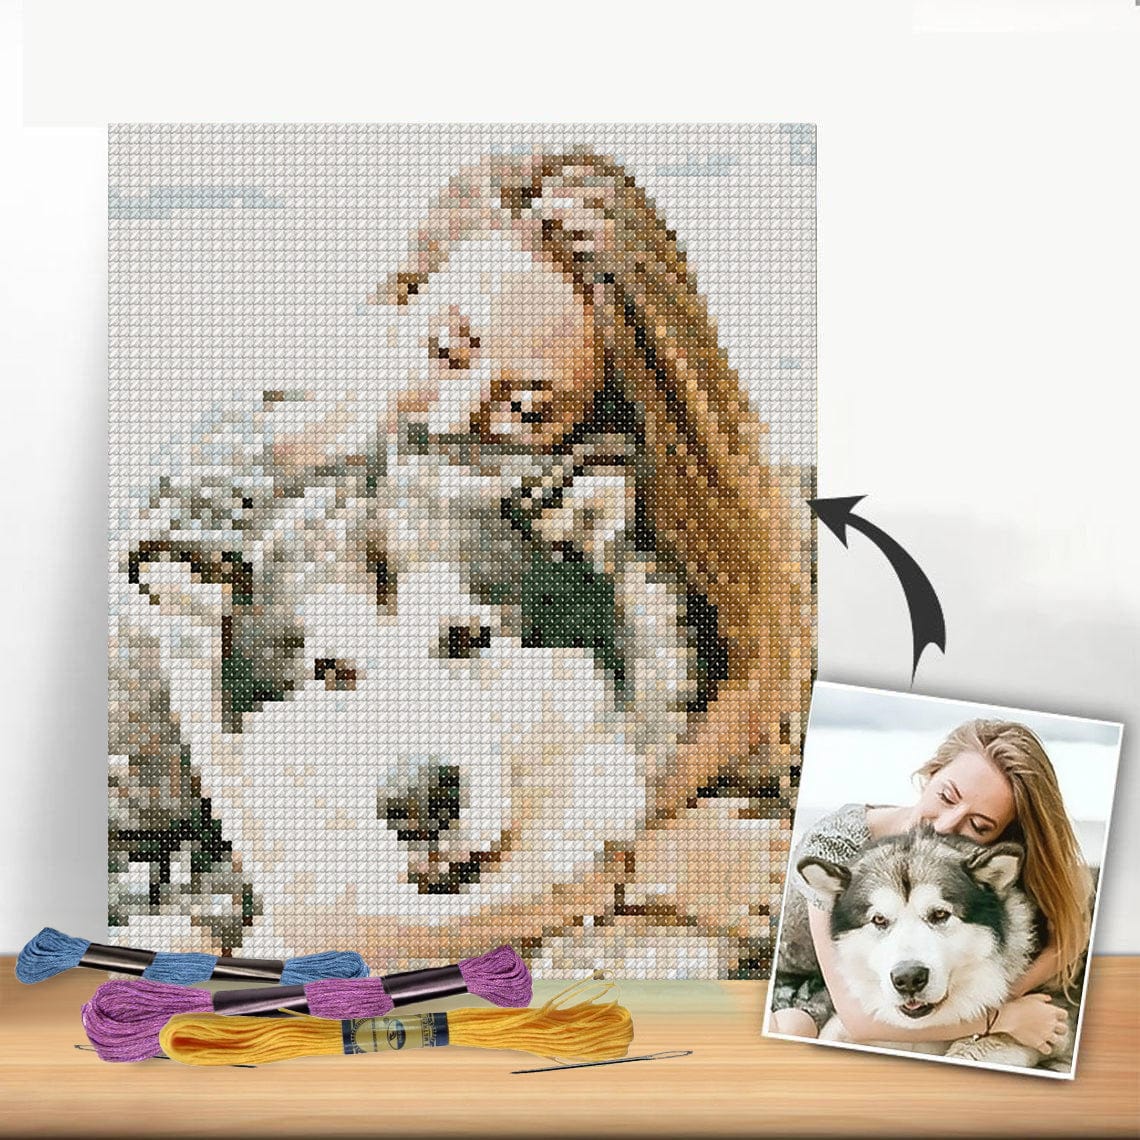 Cross Stitch | Watchful Look of Lion - Cross Stitched